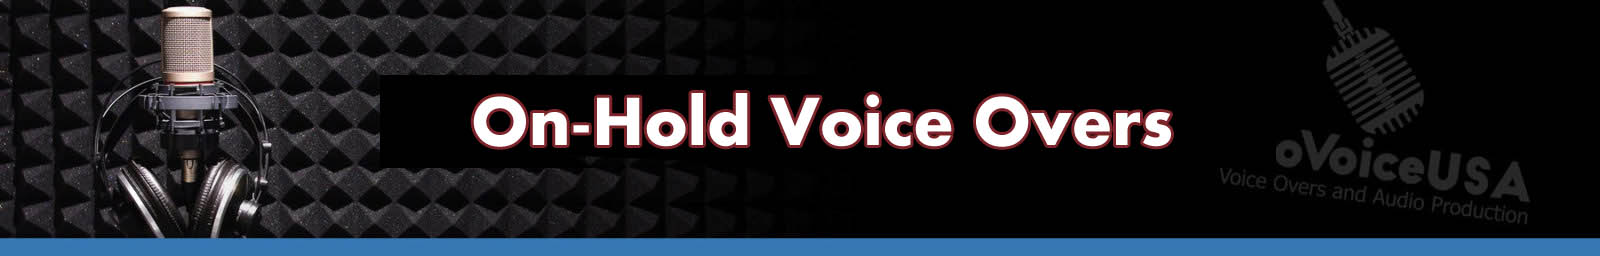 On Hold Voice Overs | Phone Greeting Recording Service | ProVoice USA